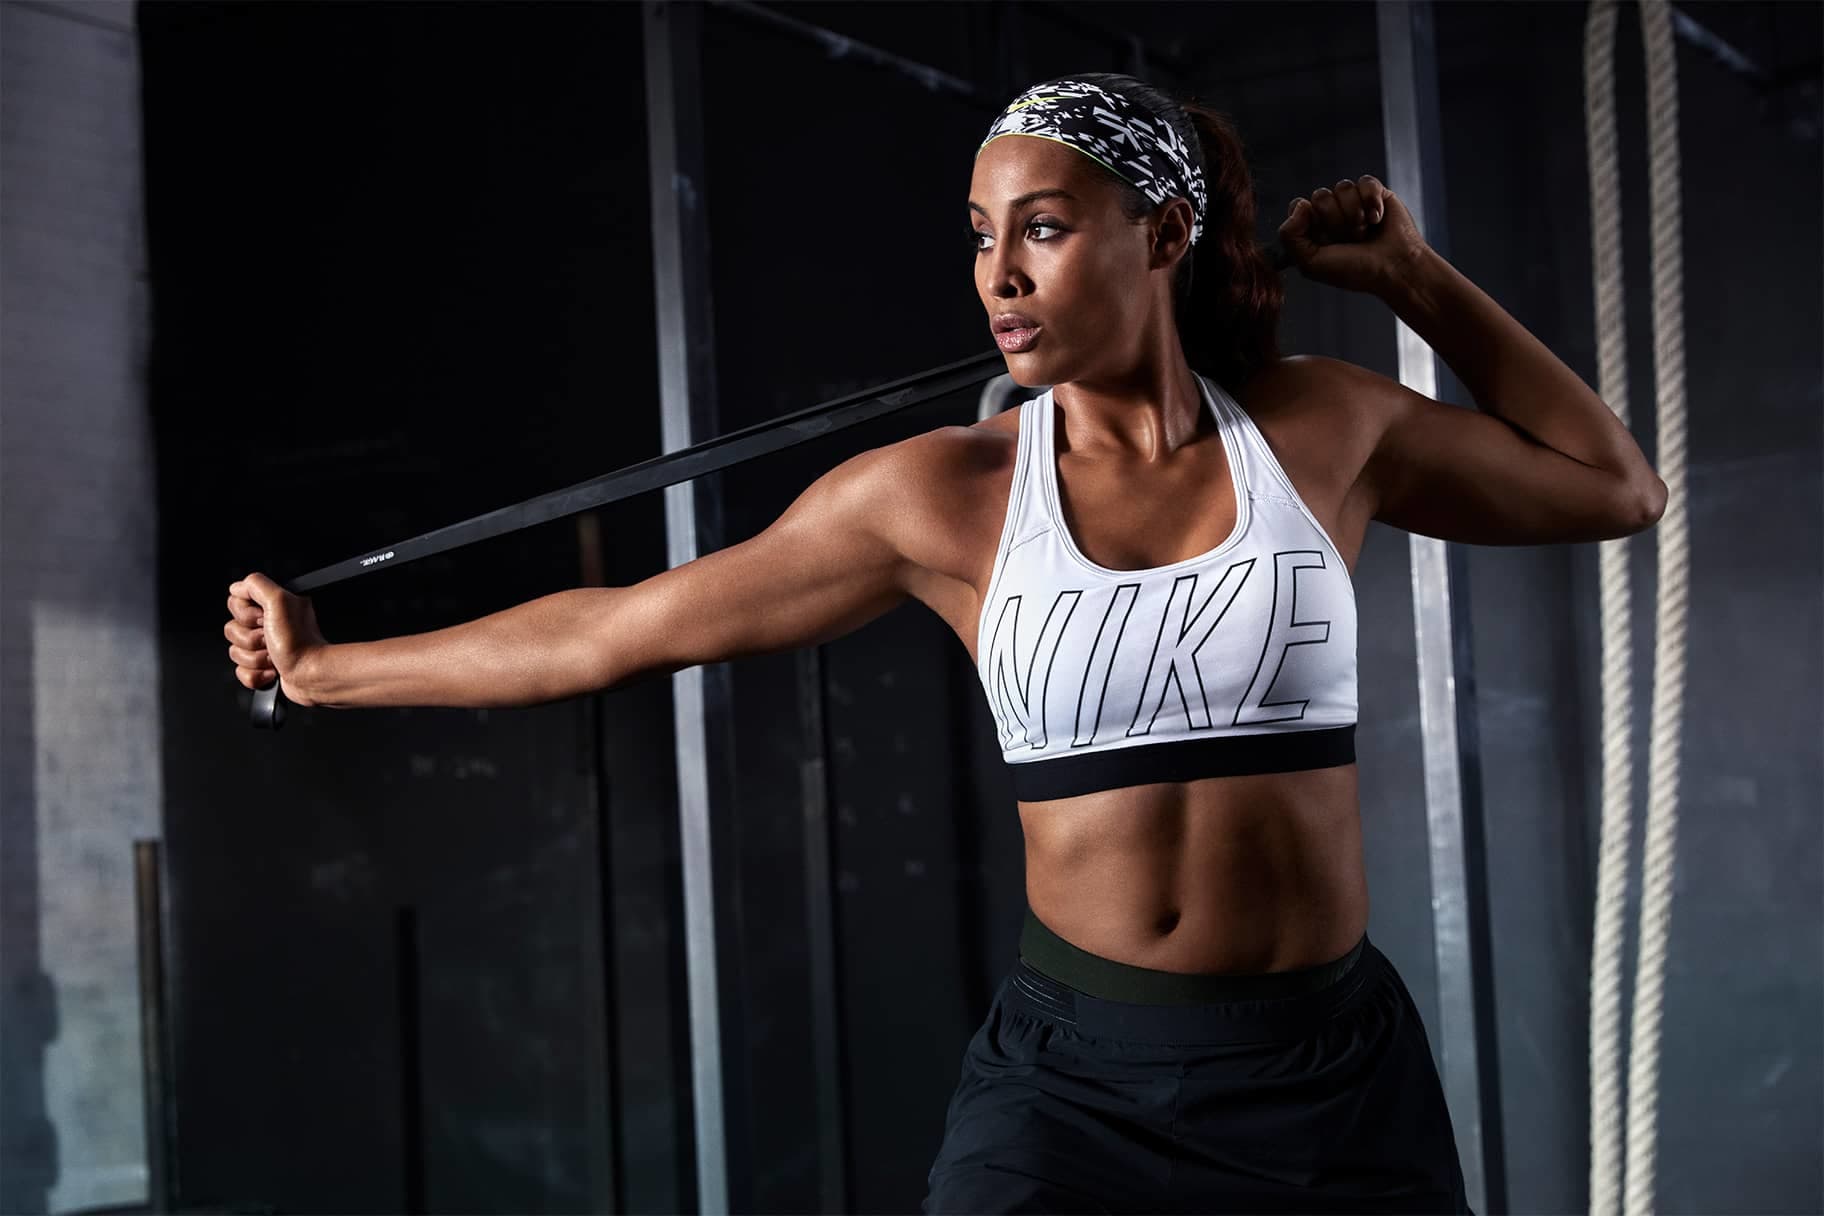 The Best Nike Resistance Bands to Shop Now. Nike CA